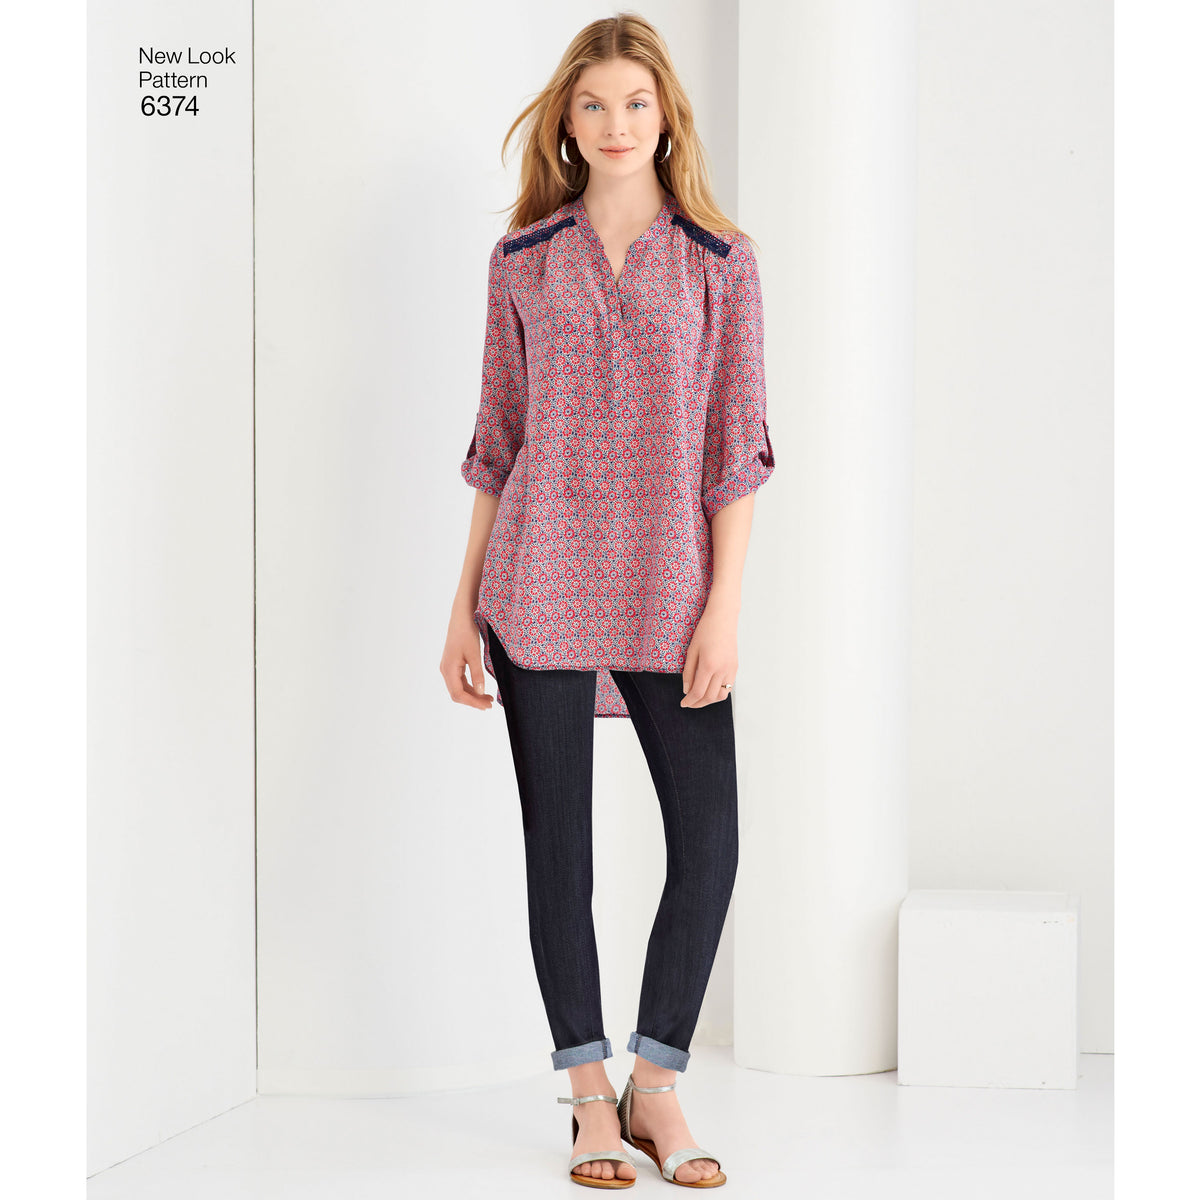 6374 Misses' Shirts with Sleeve and Length Options